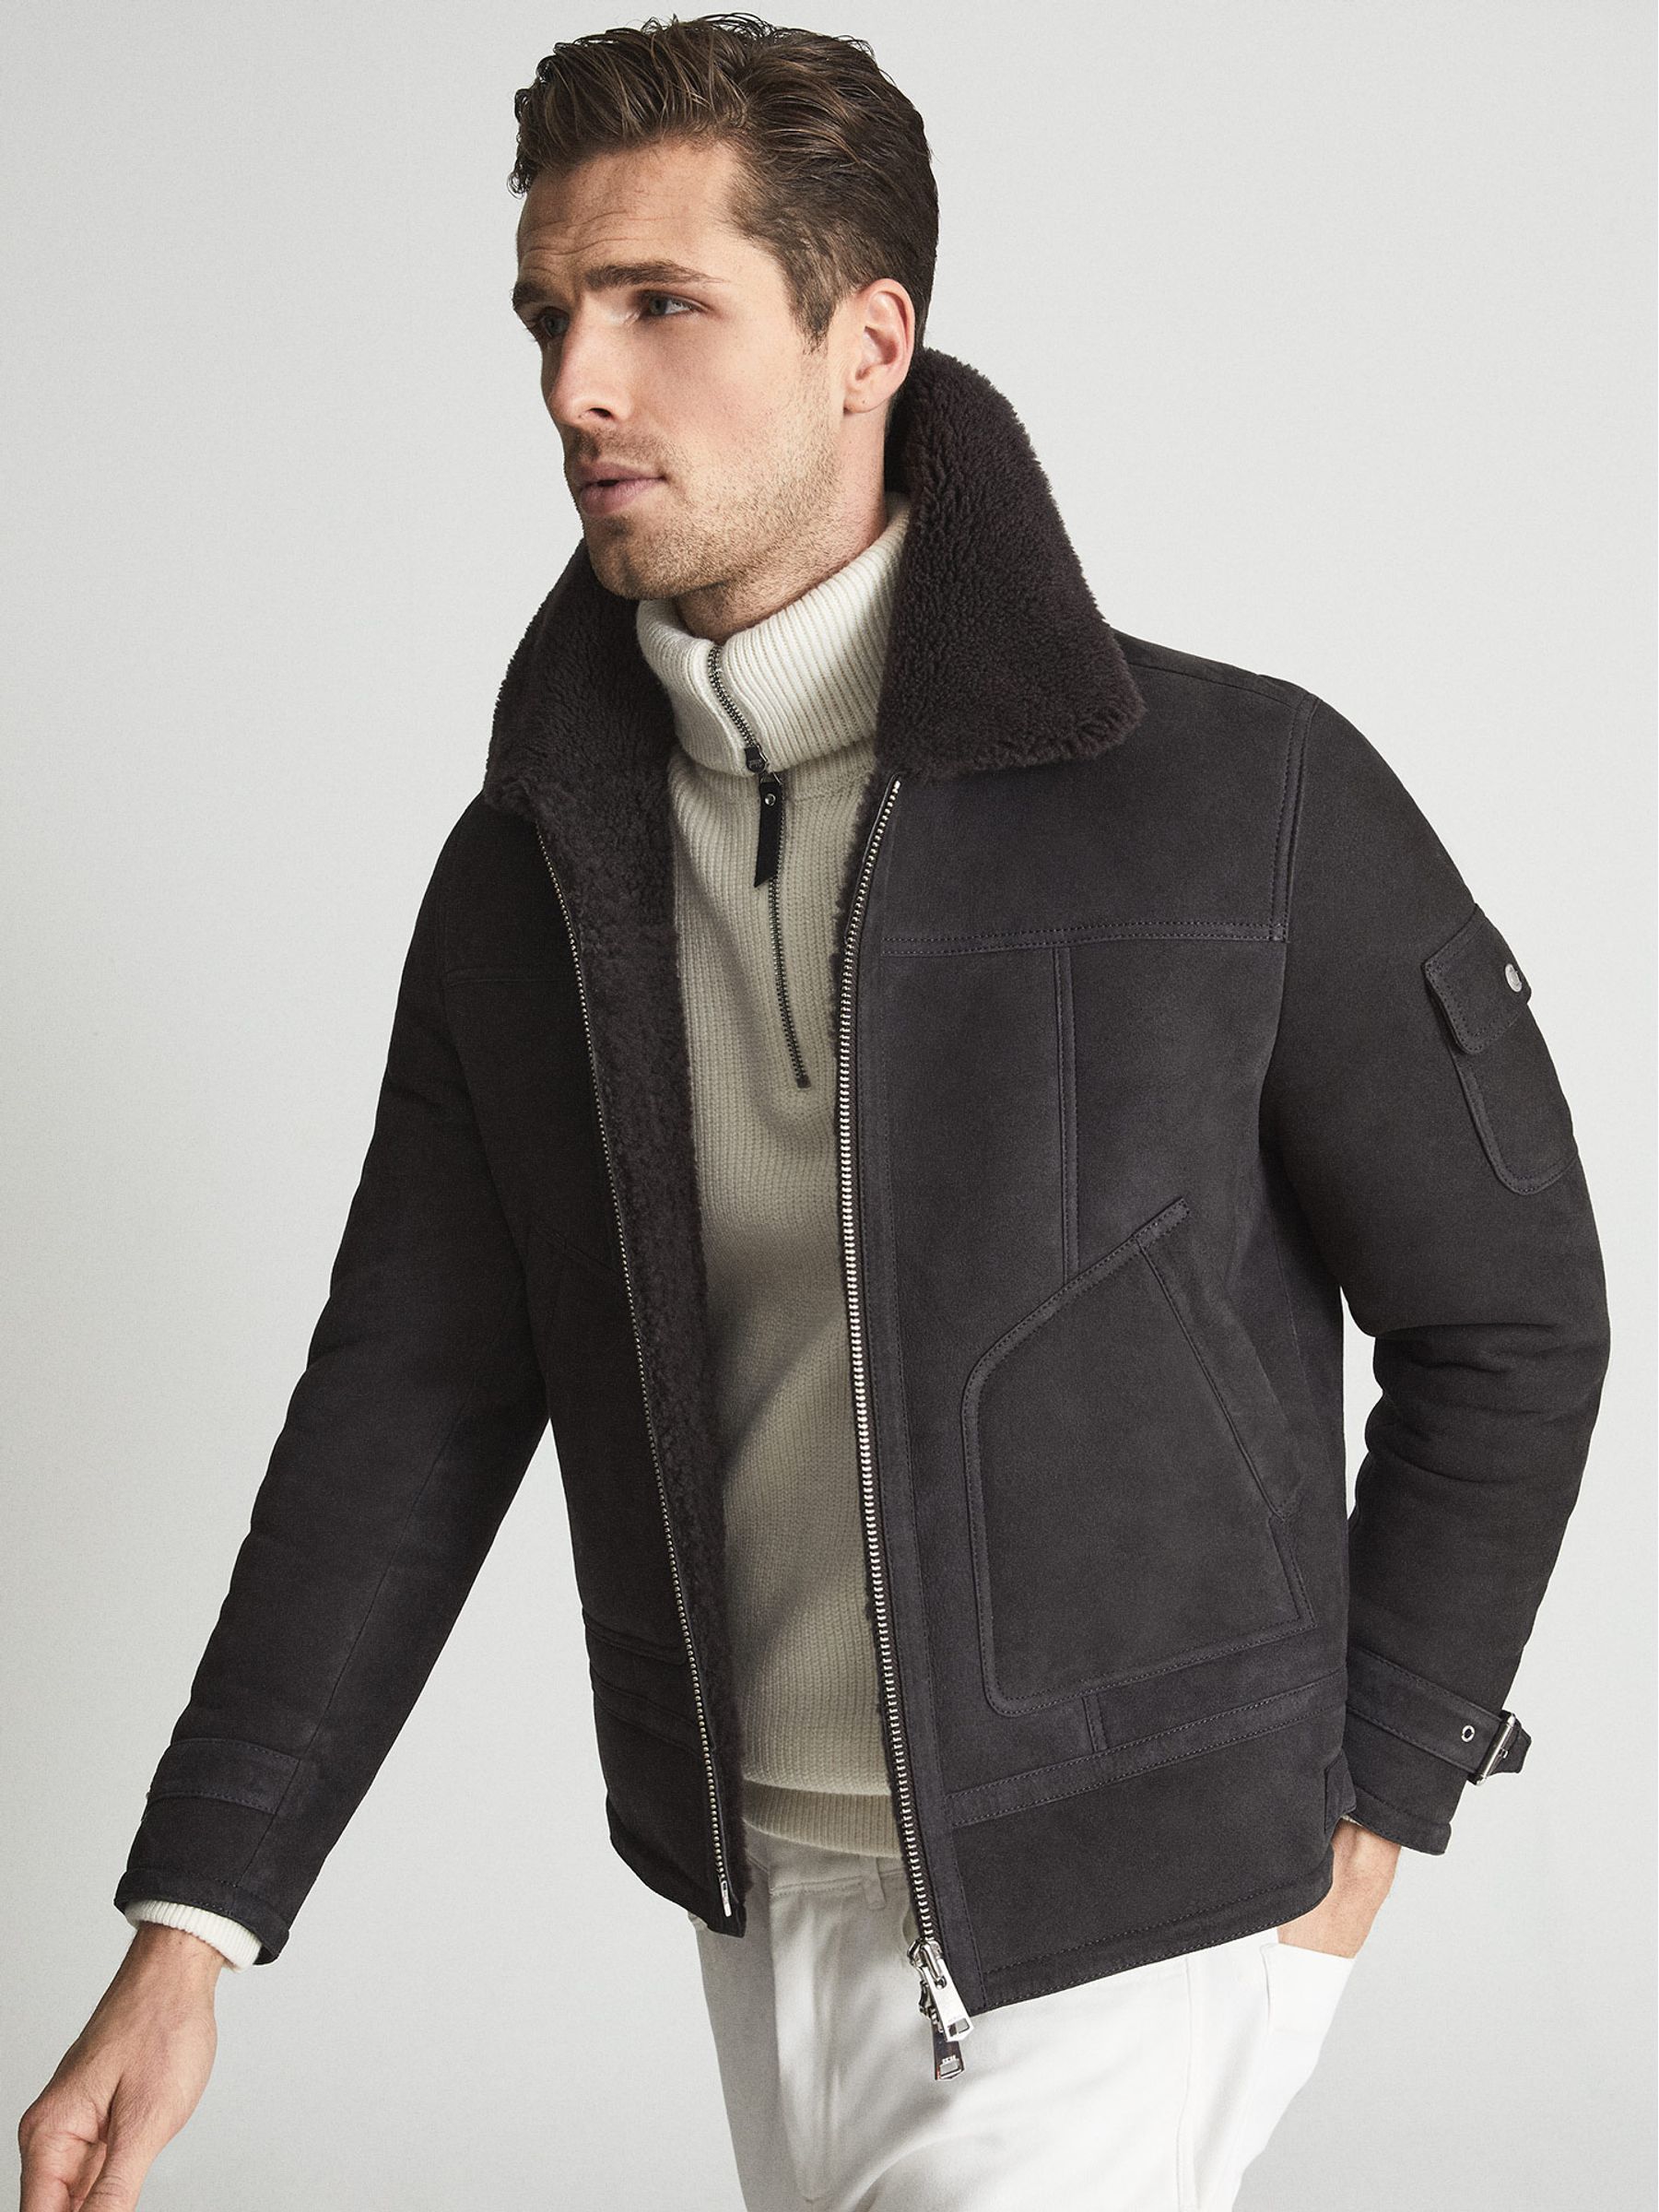 Reiss York Suede Shearling Jacket | REISS USA